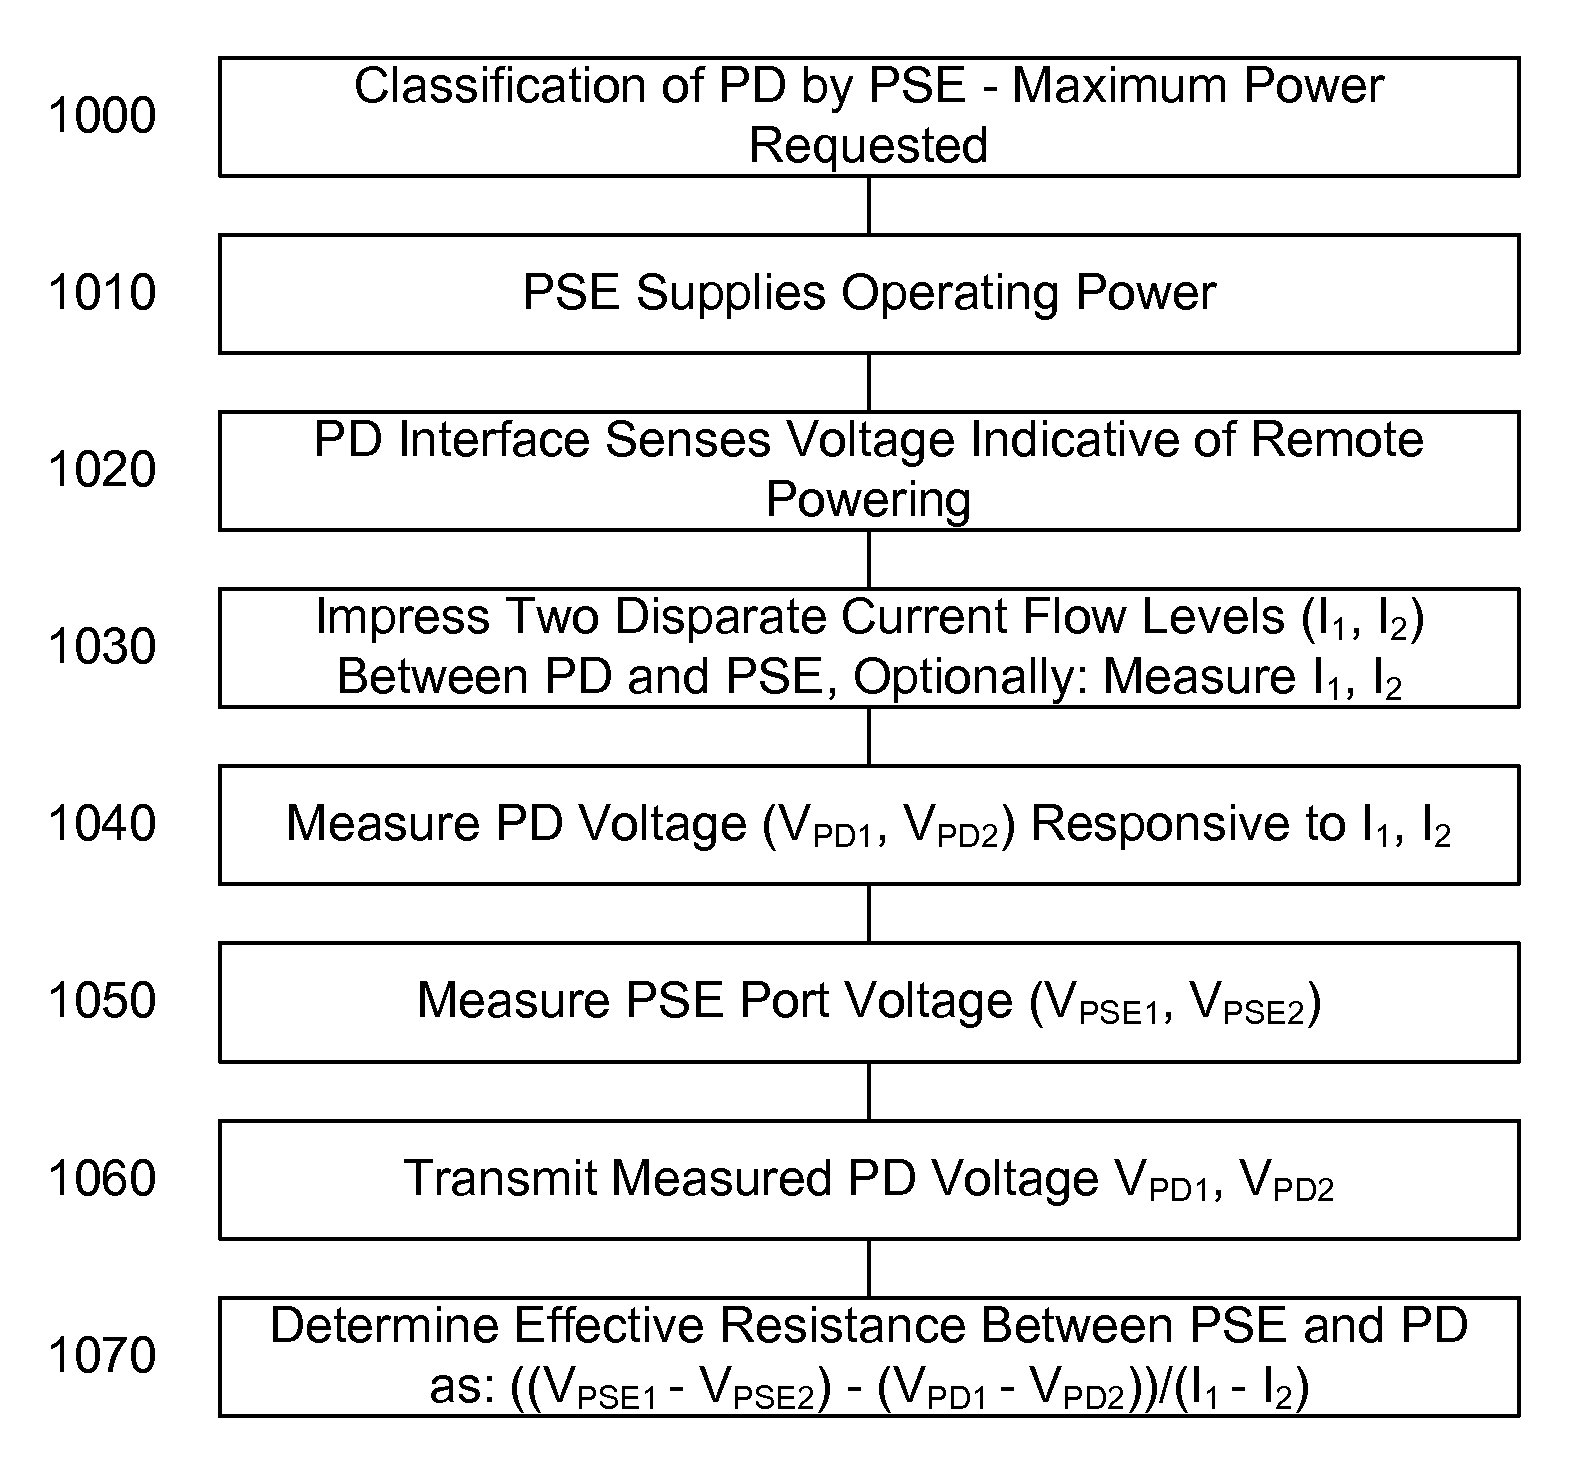 Determination of Effective Resistance Between a Power Sourcing Equipment and a Powered Device